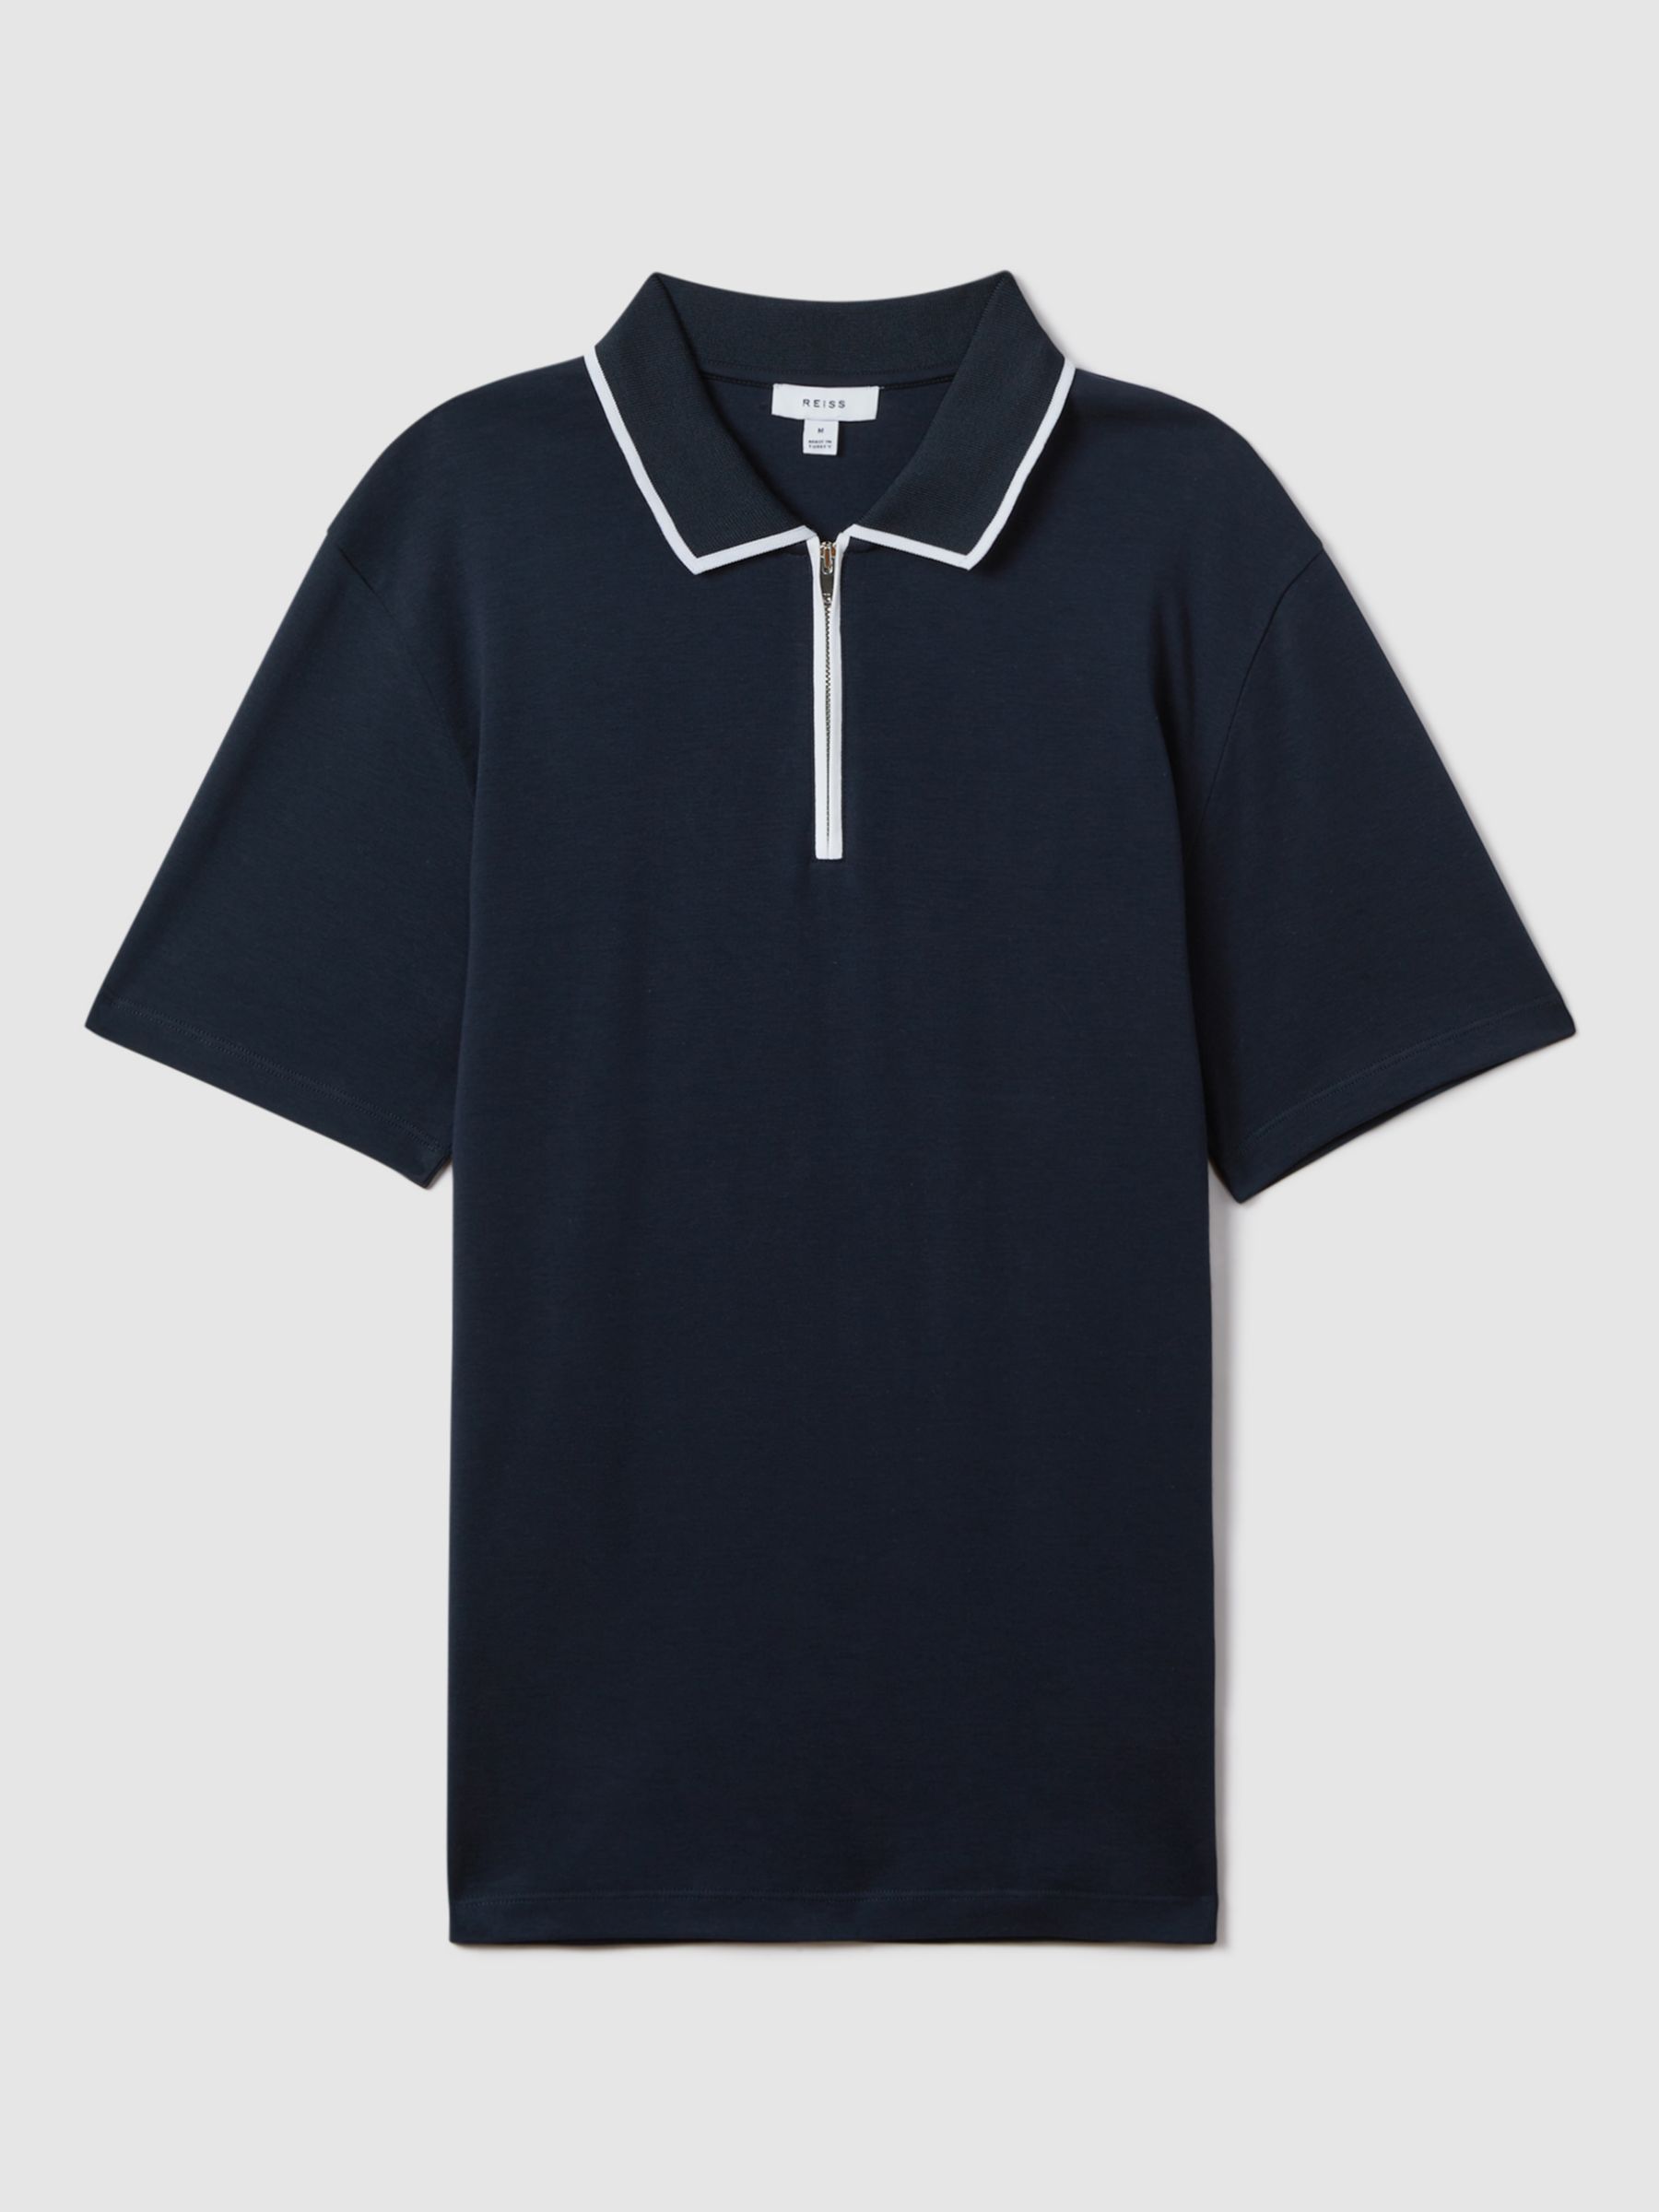 Reiss Cannes Short Sleeve Cotton Ribbed Polo Shirt, Navy, XL